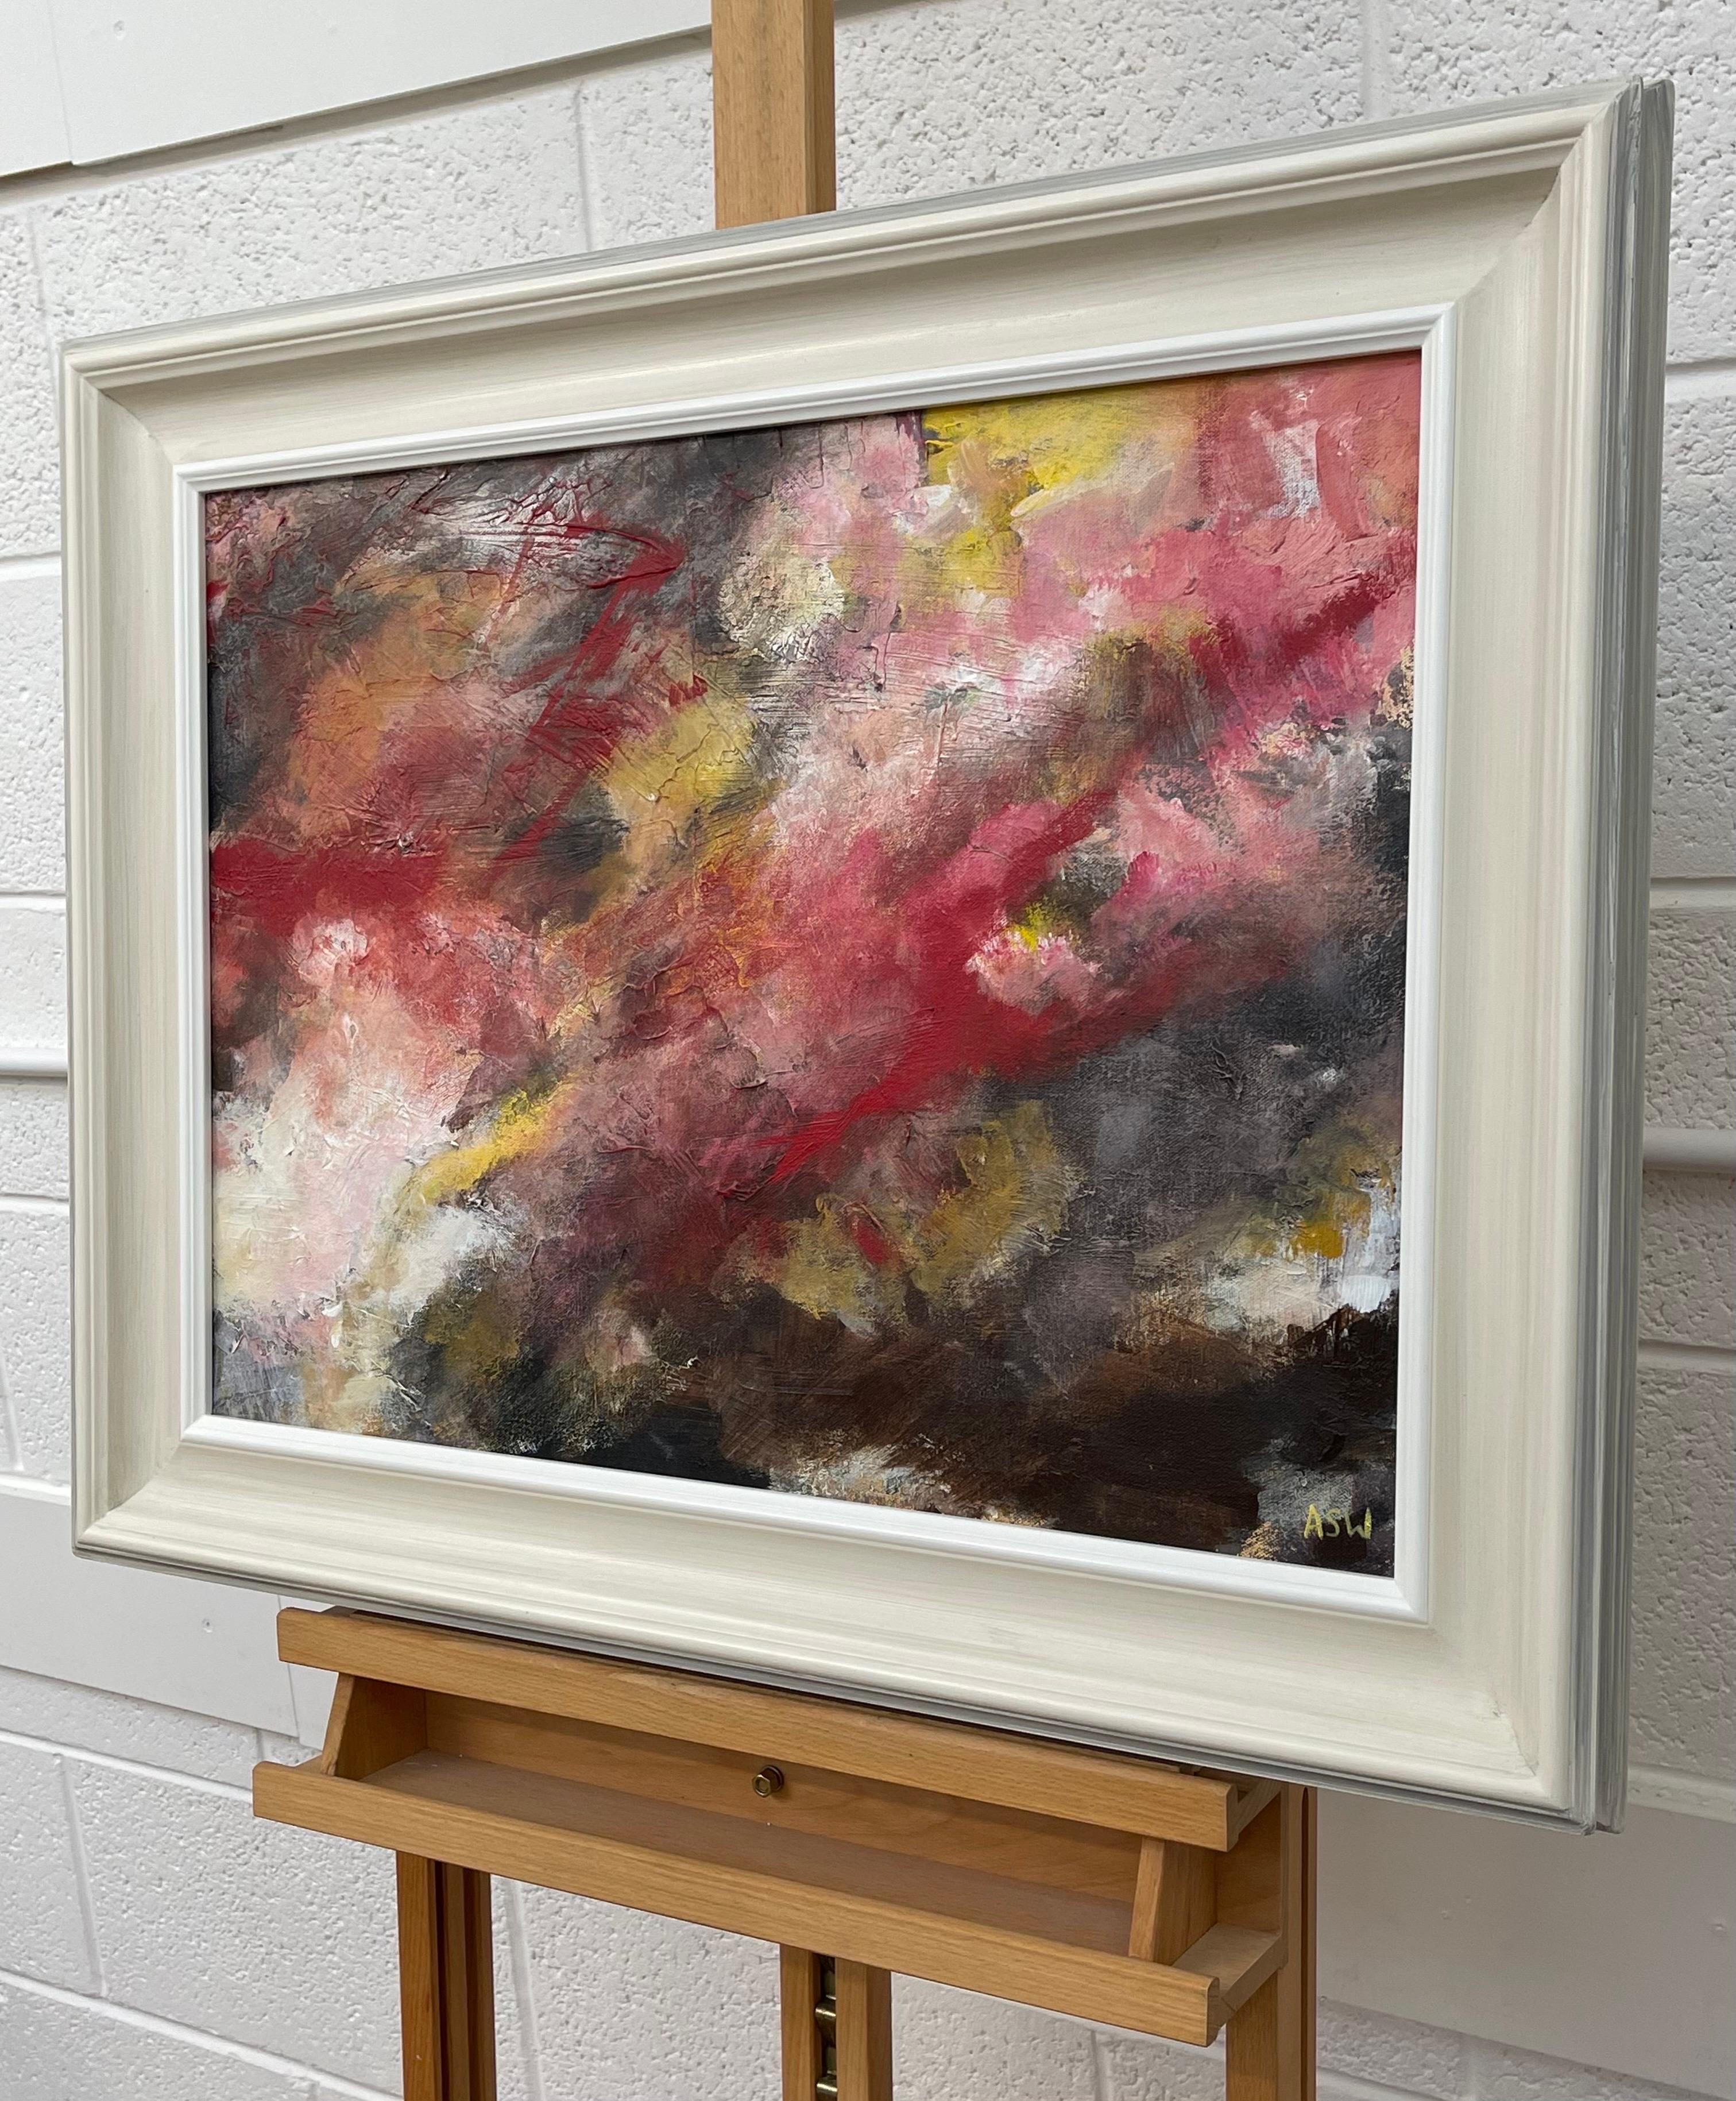 Abstract Landscape by Contemporary British Artist, Angela Wakefield. A unique original using dark red, black and yellow colours, part of a new body of work based on human emotions. 

Art measures 24 x 18 inches
Frame measures 29 x 23 inches

Angela